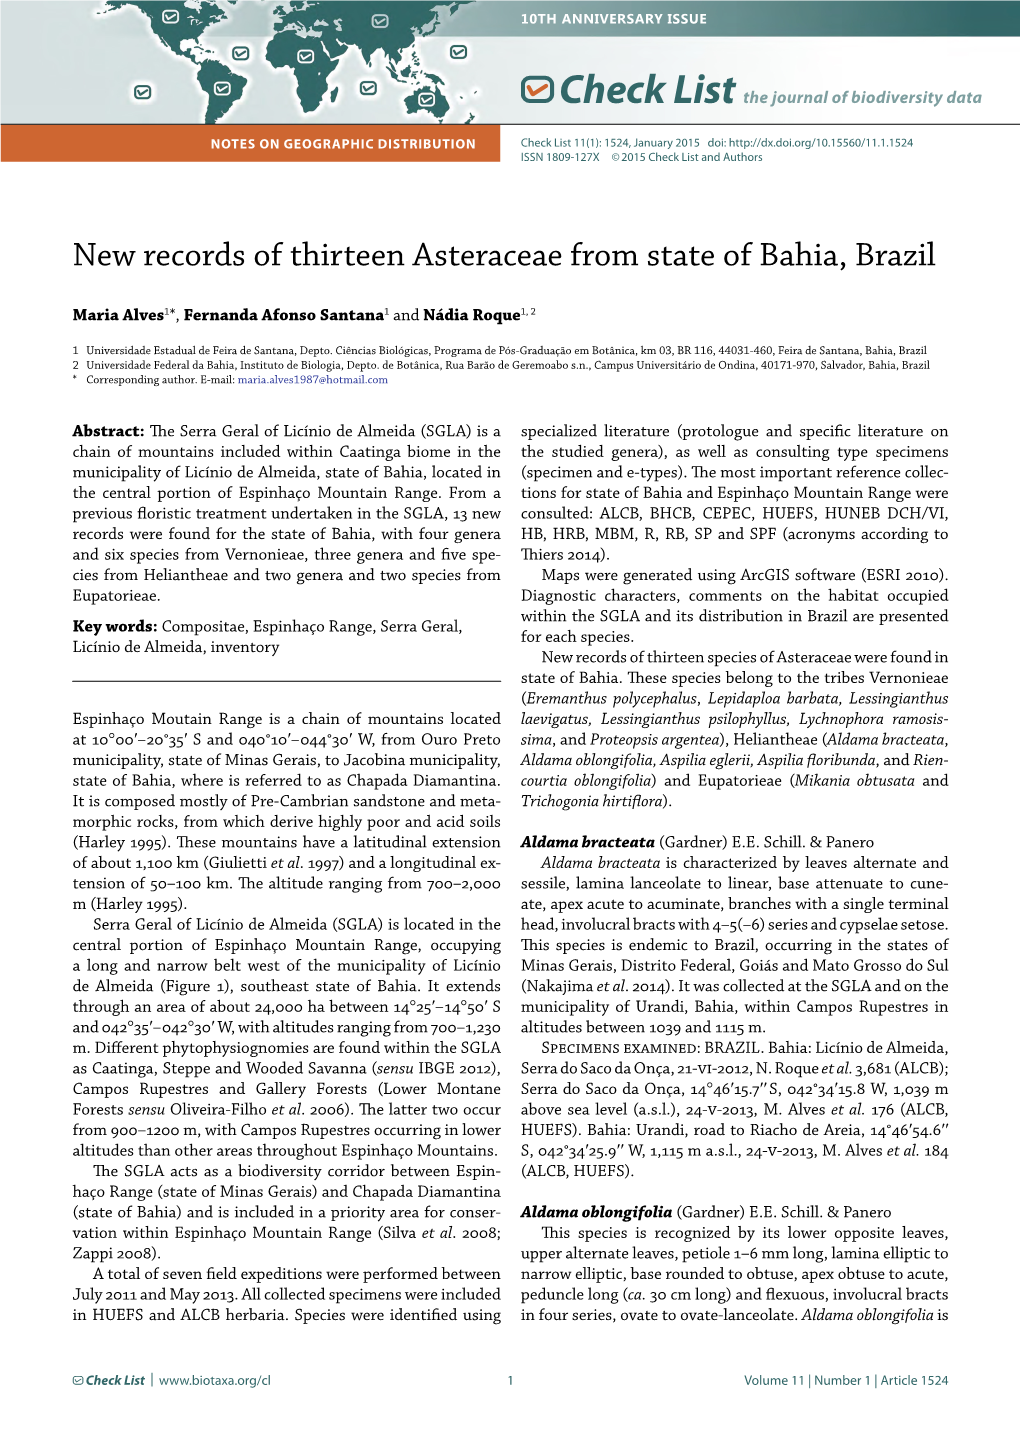 New Records of Thirteen Asteraceae from State of Bahia, Brazil